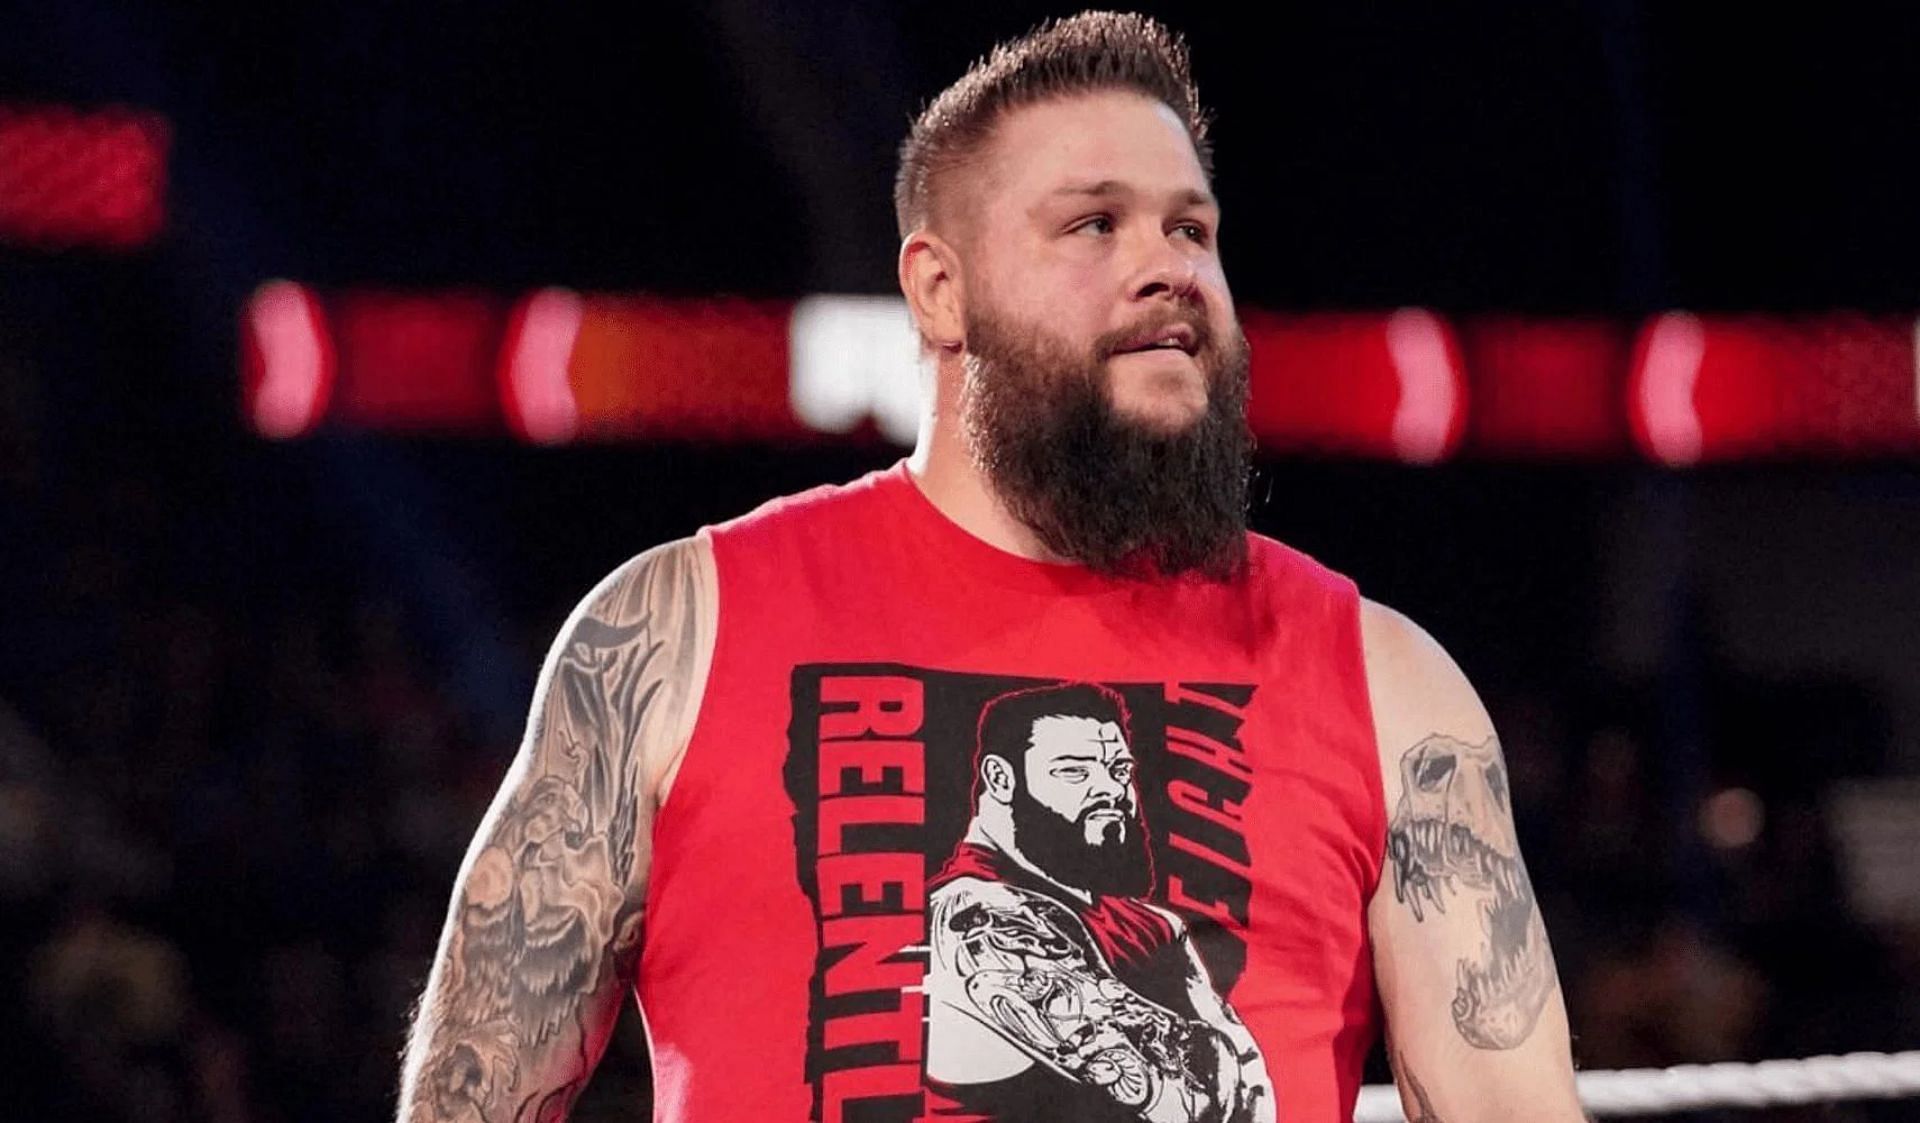 Kevin Owens is one of the biggest superstars in WWE today.